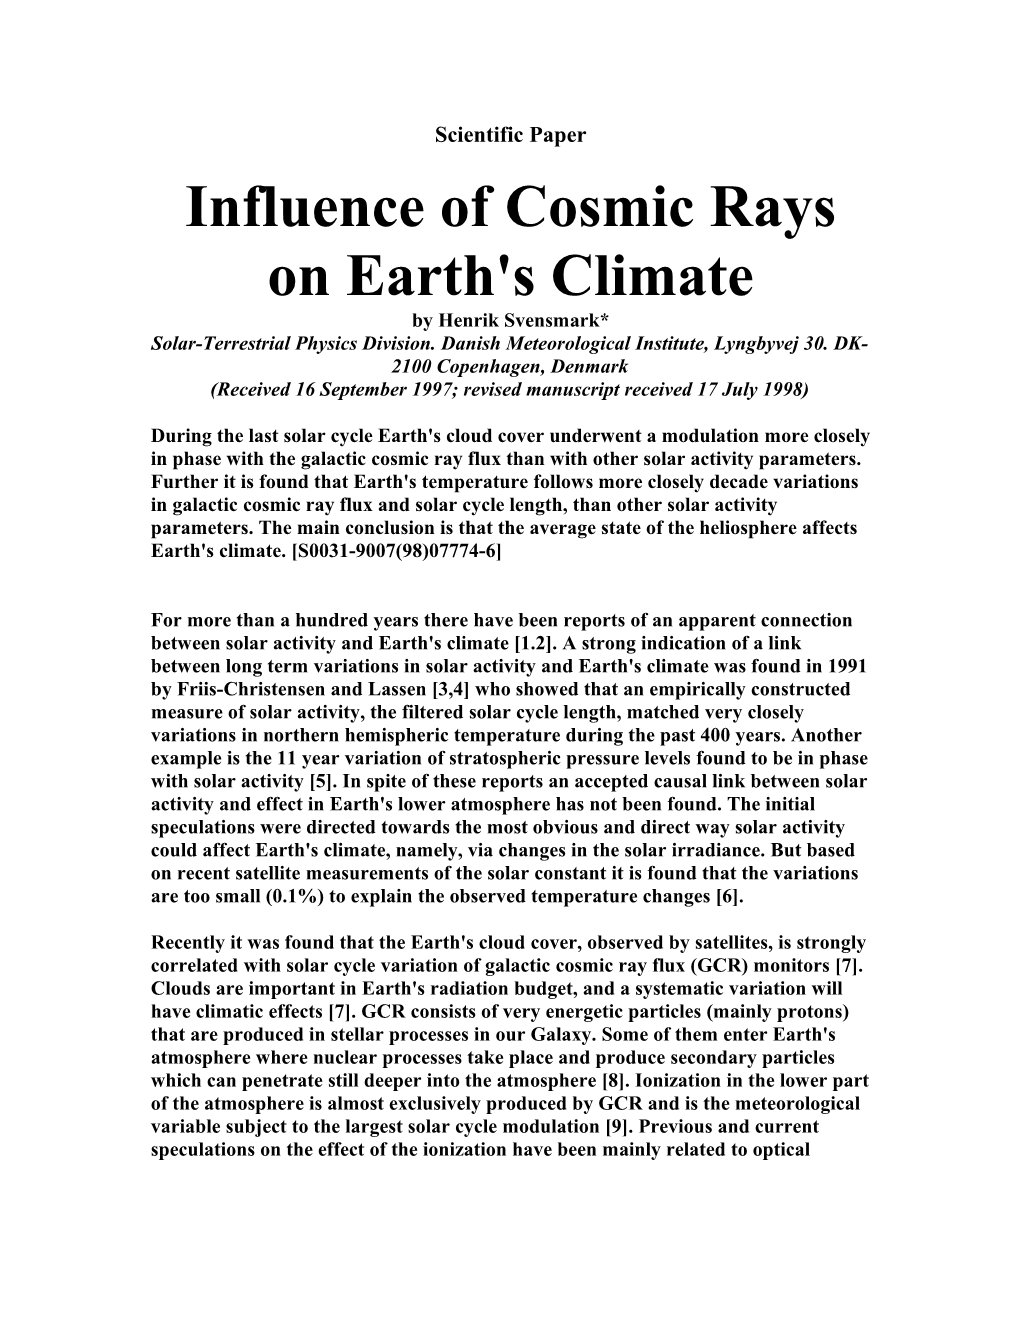 Influence of Cosmic Rays on Earth's Climate